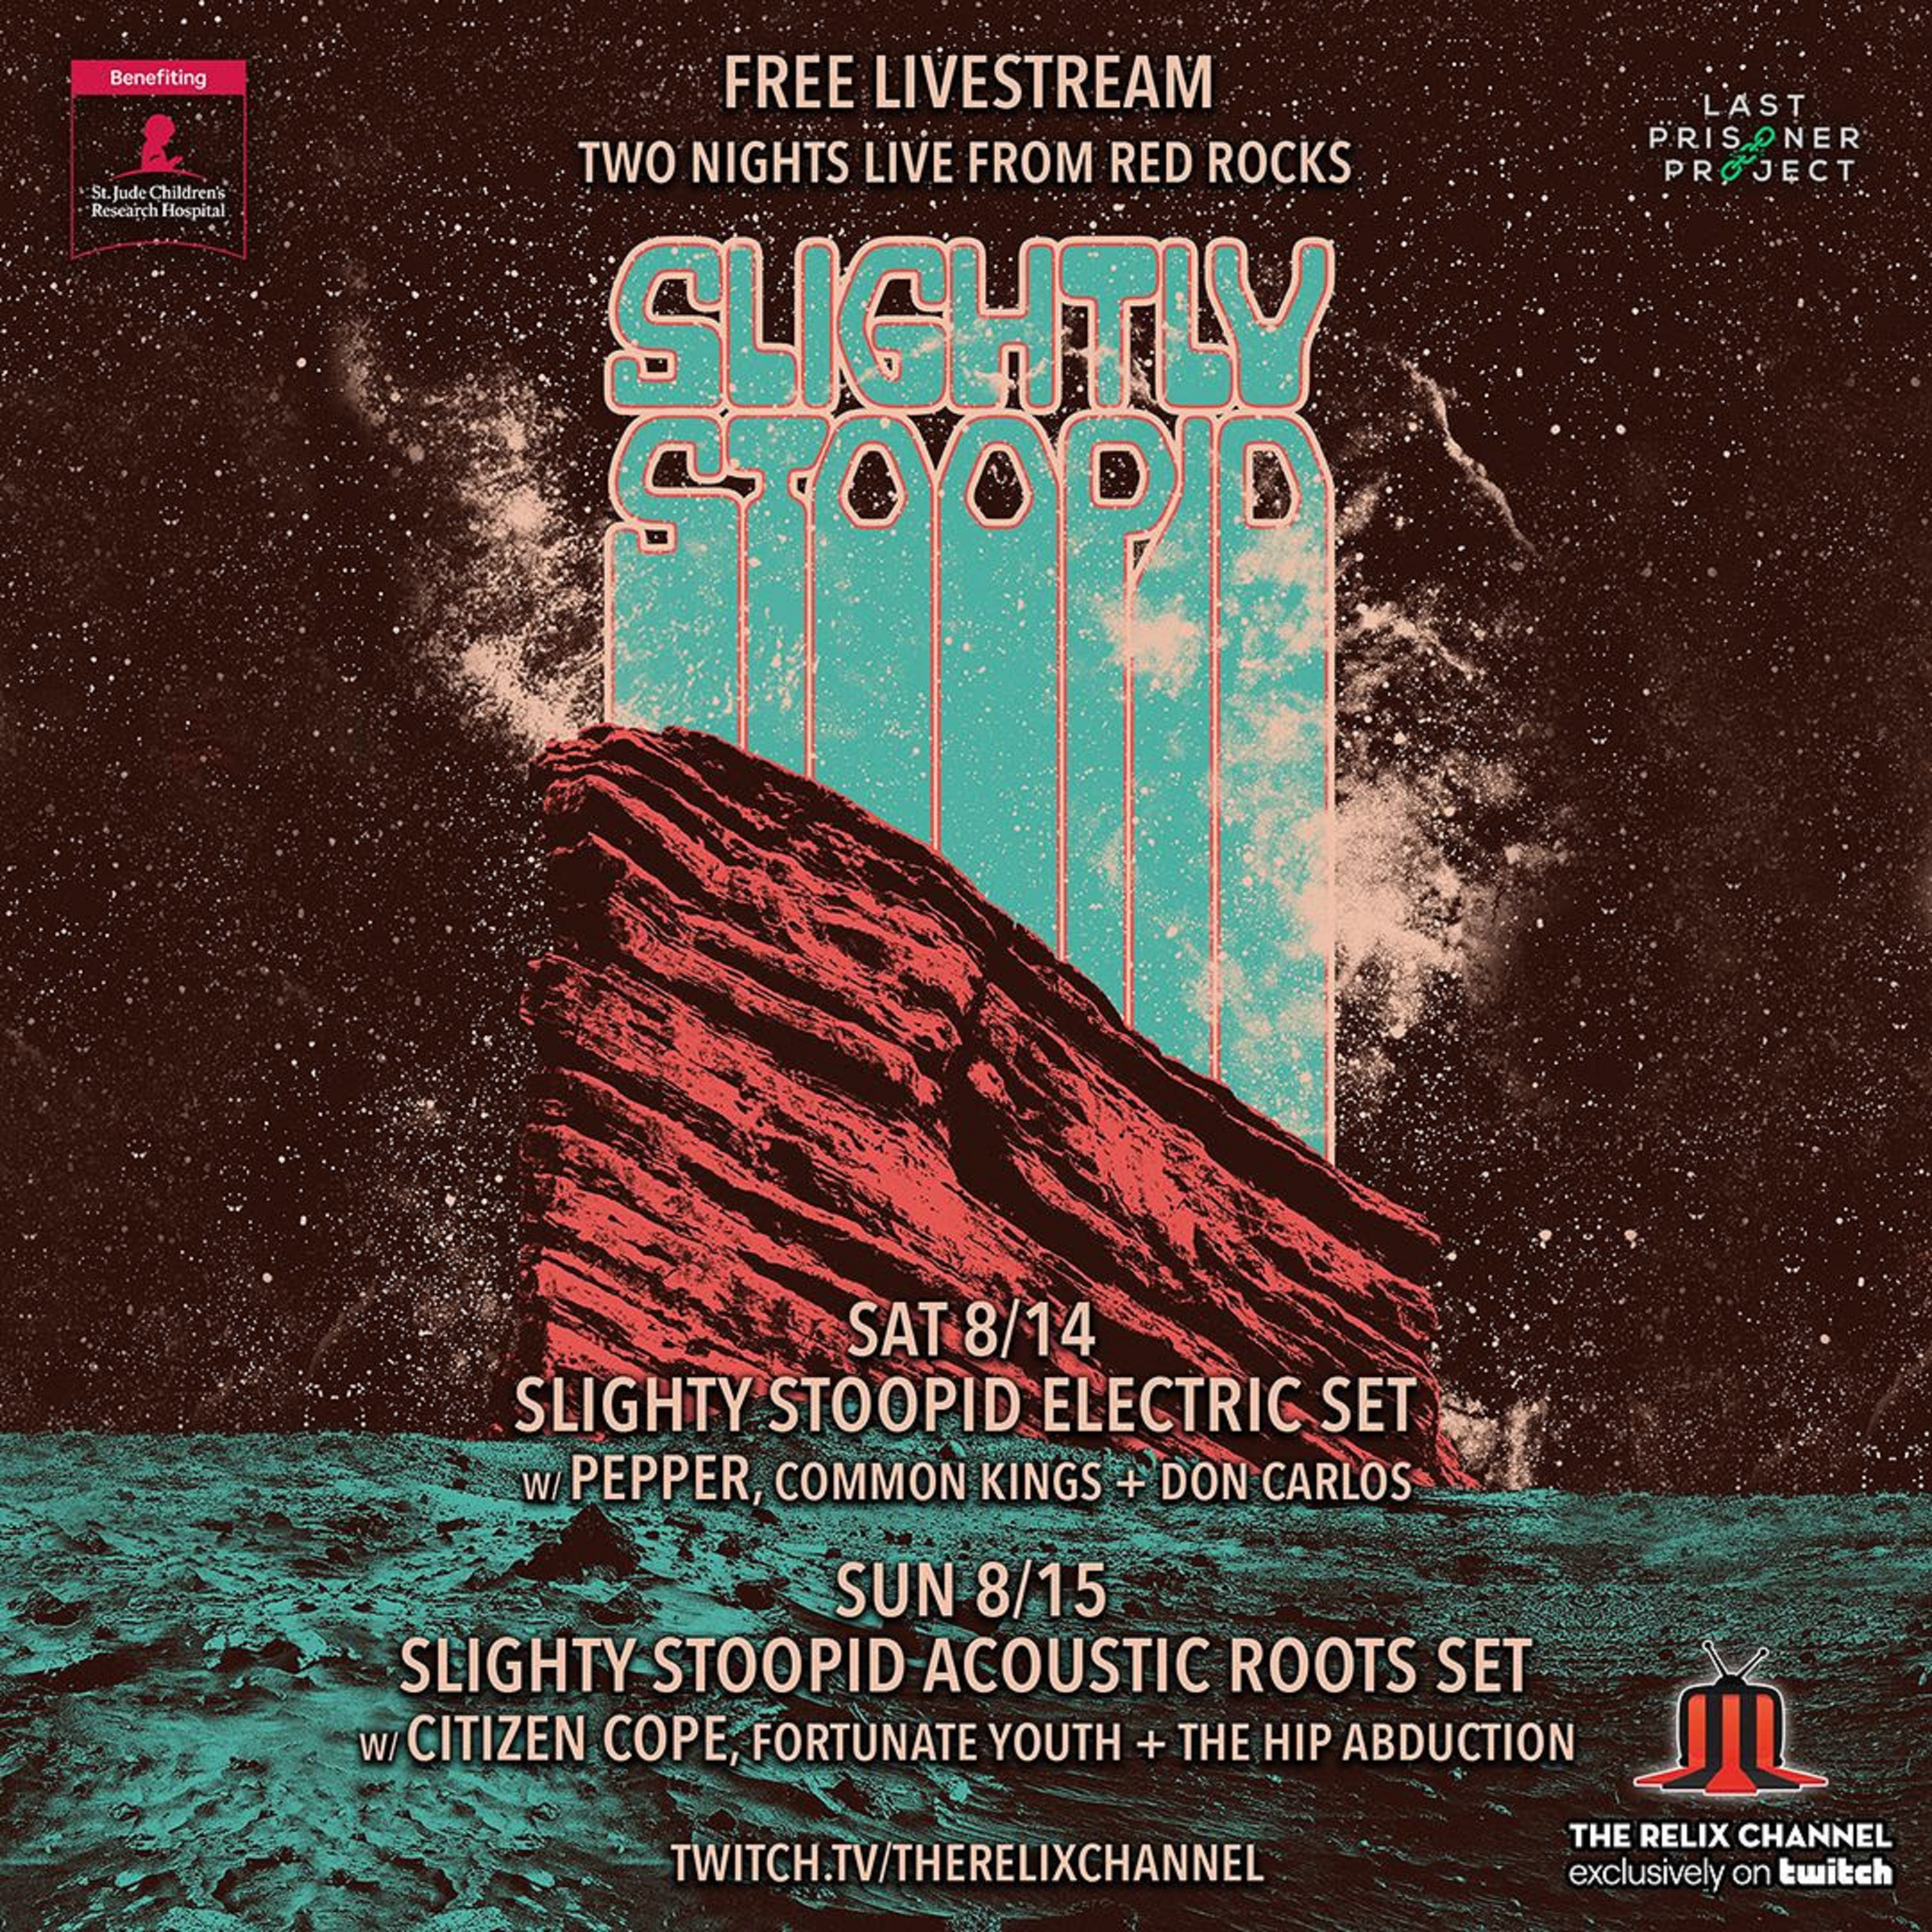 SLIGHTLY STOOPID “DOUBLE ON THE ROCKS” ANNOUNCES TWO FREE LIVESTREAMS THIS WEEKEND